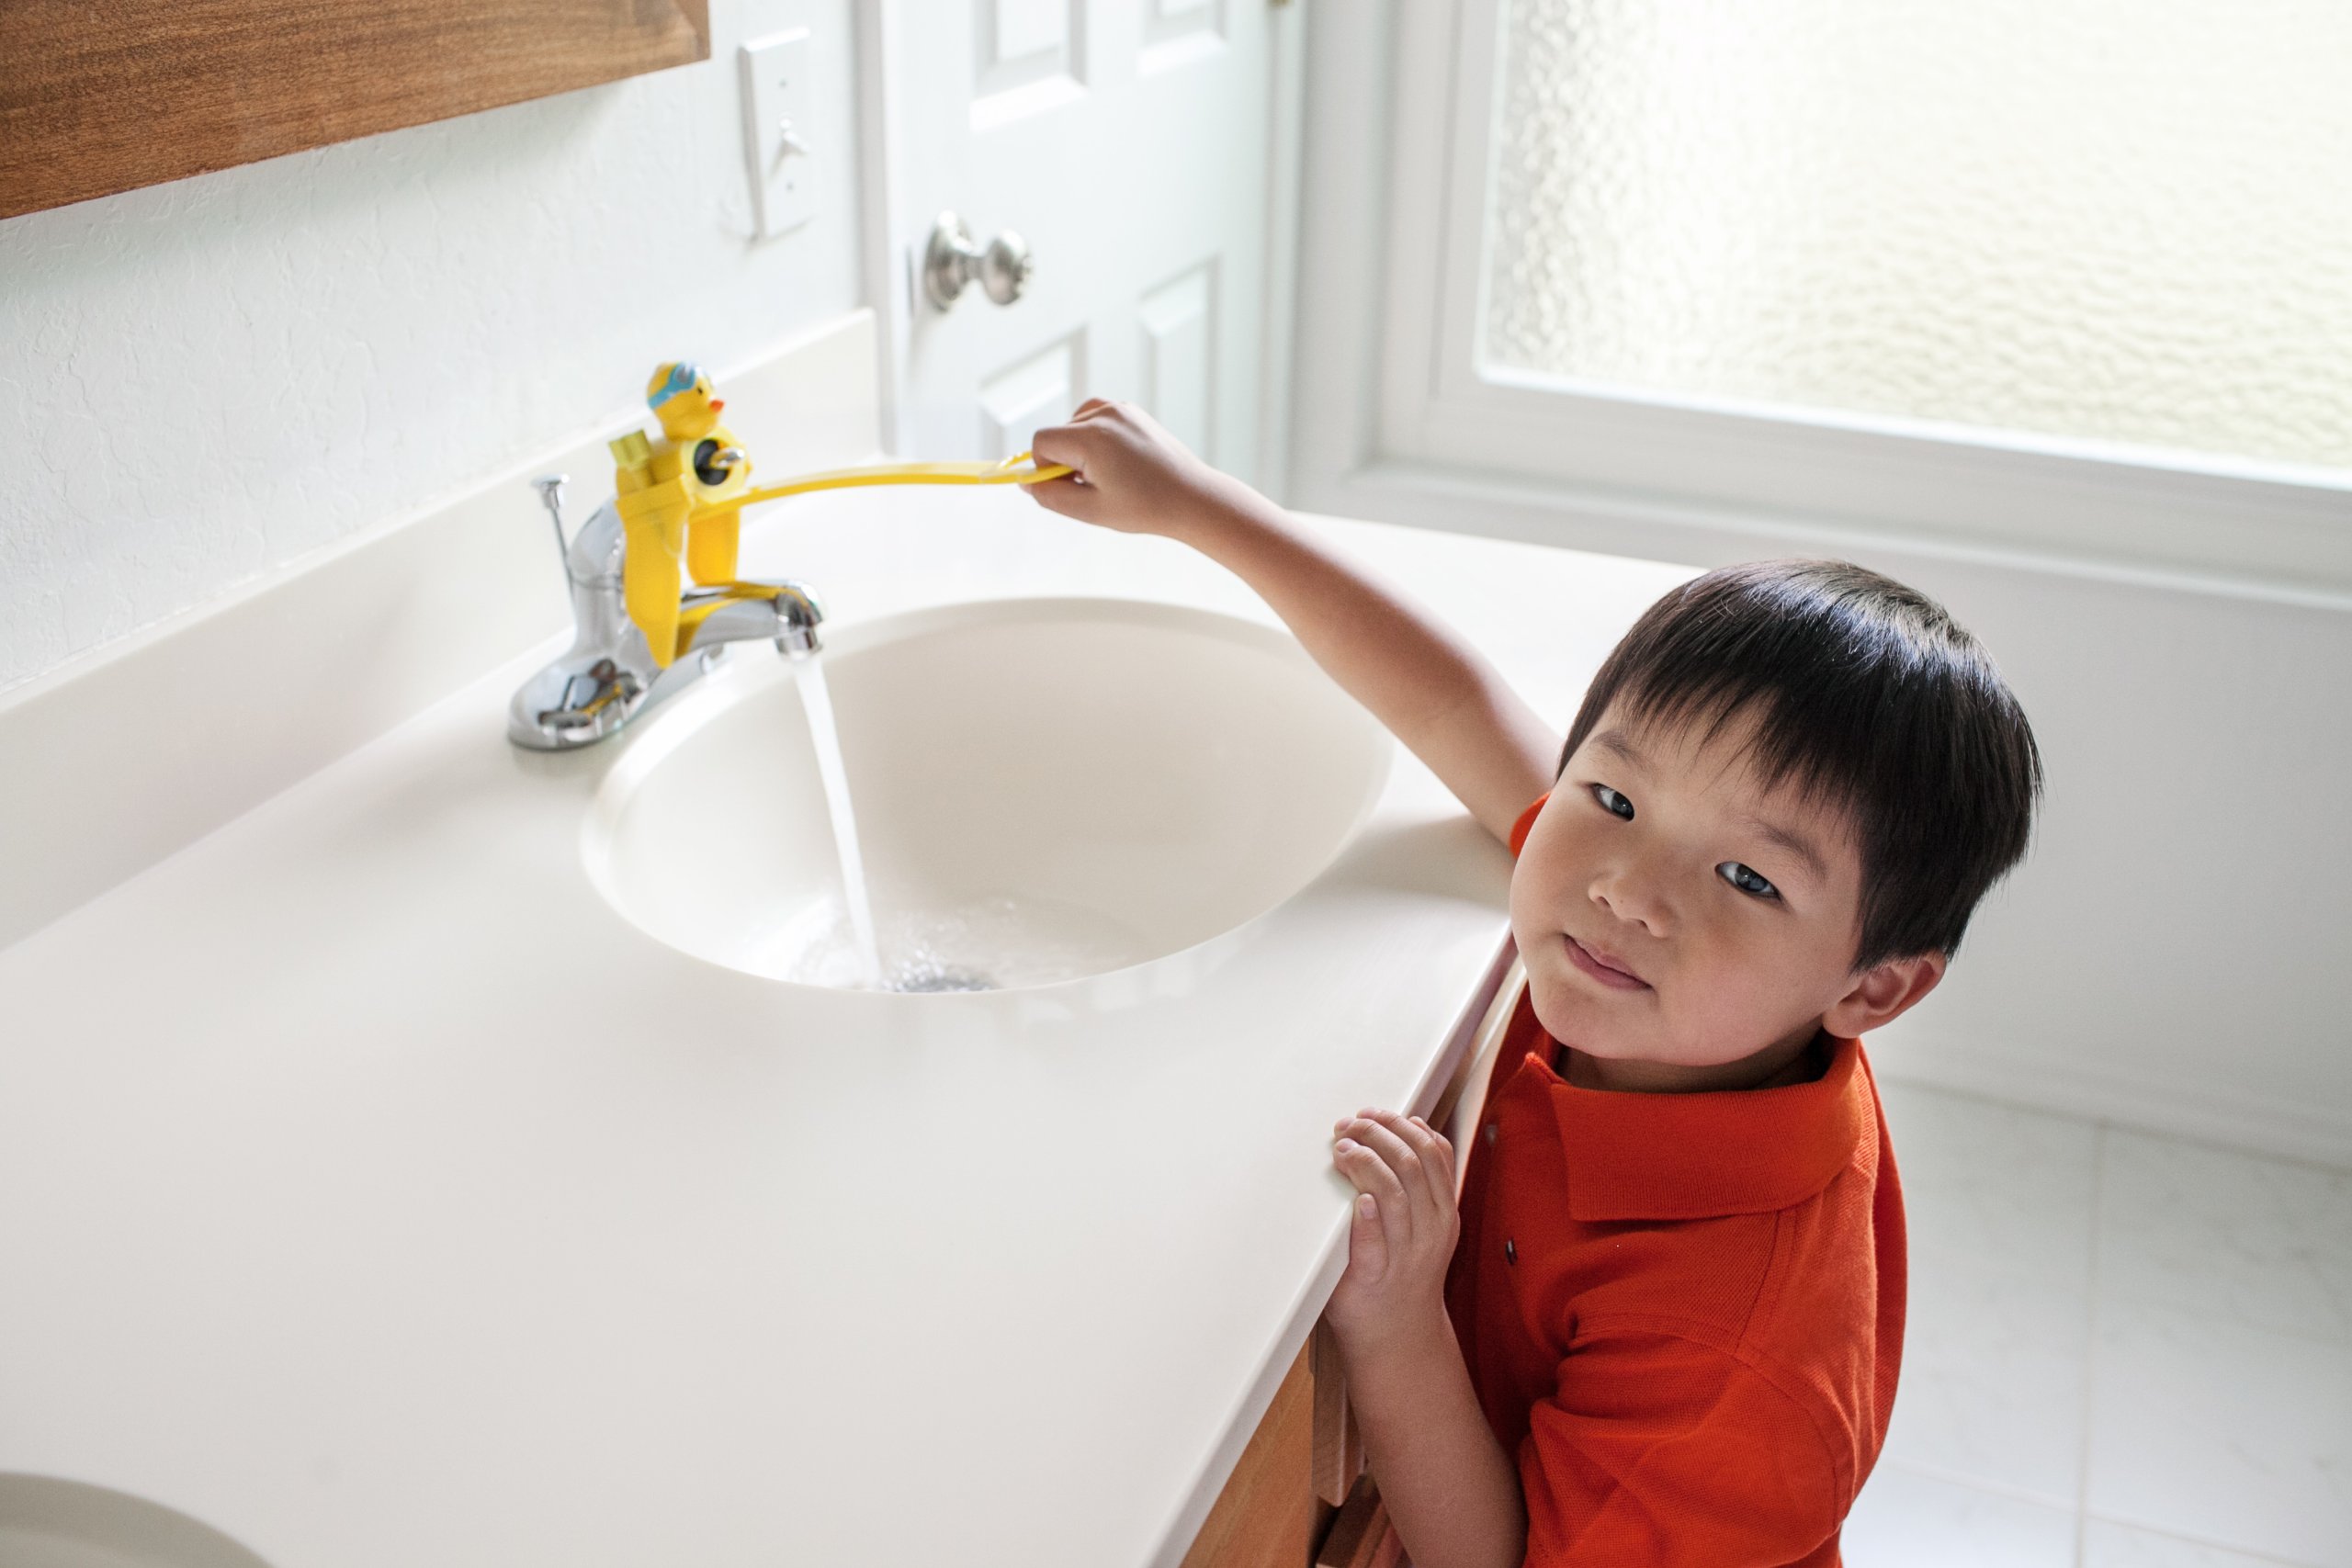 Aqueduck Faucet Handle Extender. A Safe Fun, Kid Friendly Hand Washing Solution. Connects to Sink to Make Washing Hands Fun and Teaches your Baby or Child Good Habits (Single Handle Faucets. Yellow)